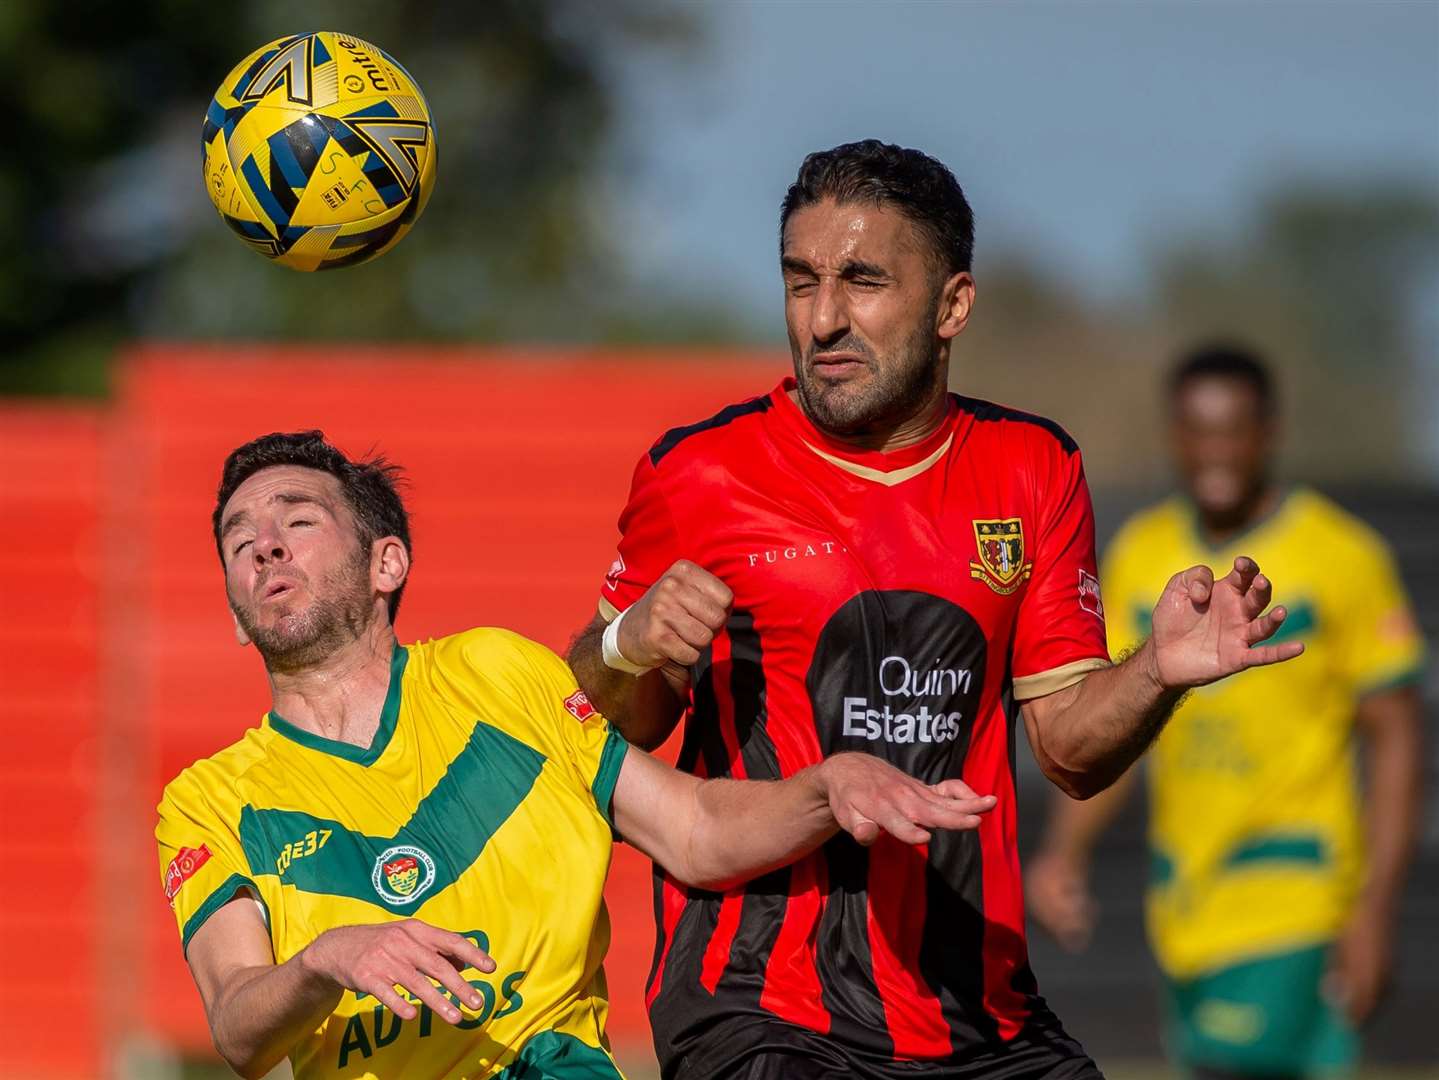 Sittingbourne midfielder Toch Singh in the thick of things against Ashford. Picture: Ian Scammell/Isobel Scammell